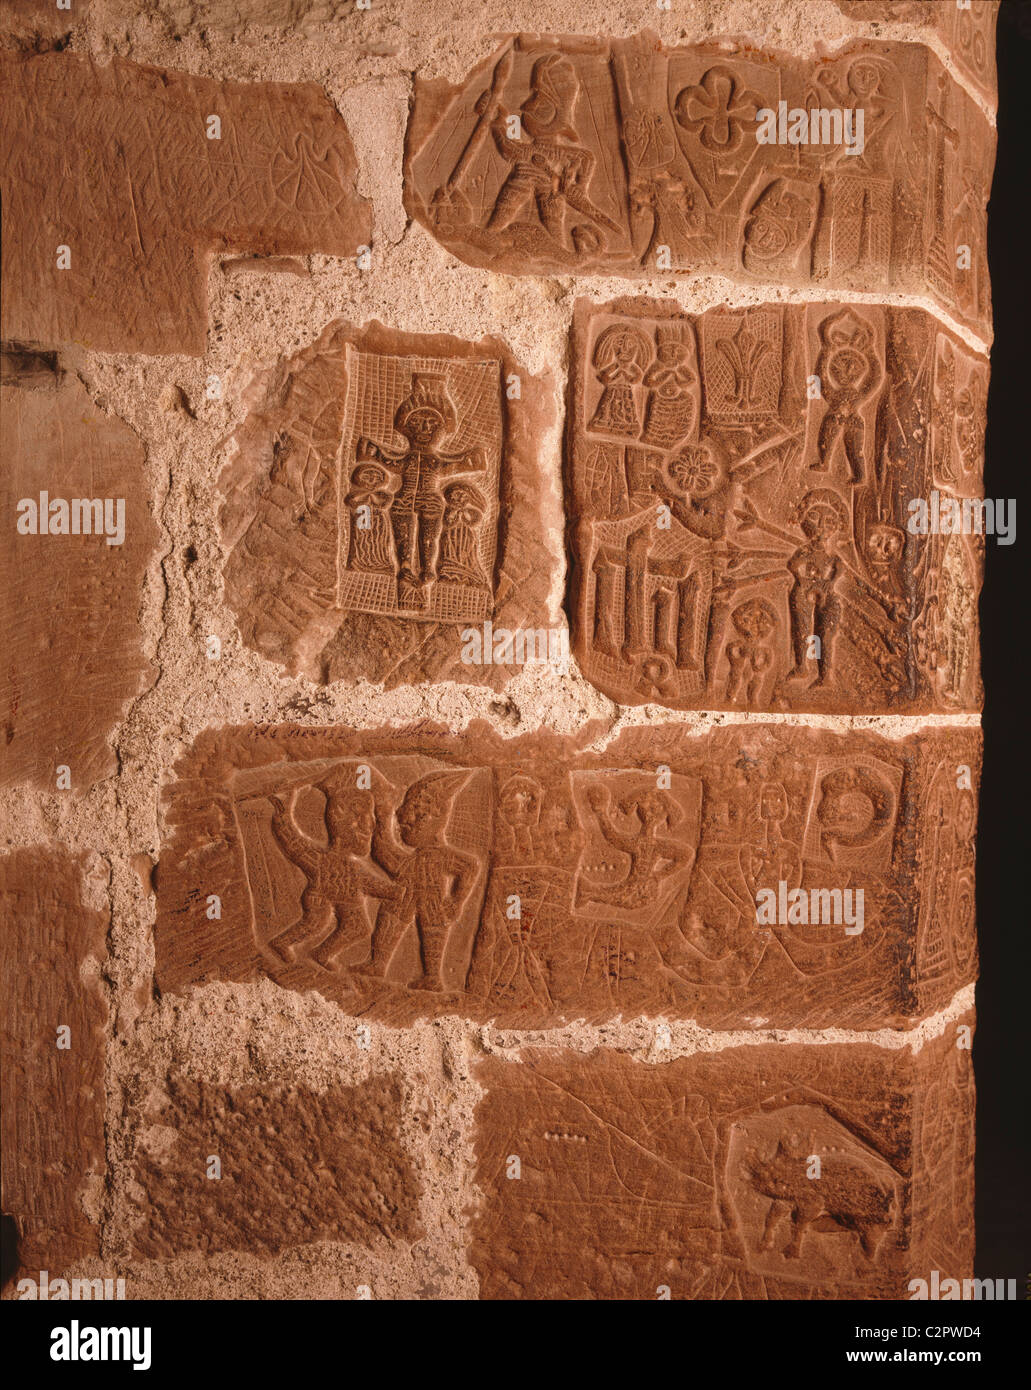 Carlisle Castle. Prisoners carvings dating to around 1480.. Stock Photo